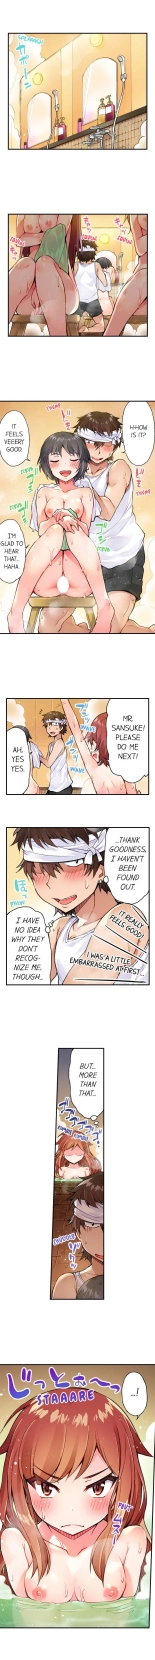 Traditional Job of Washing Girls' Body Ch. 1-192 : page 120